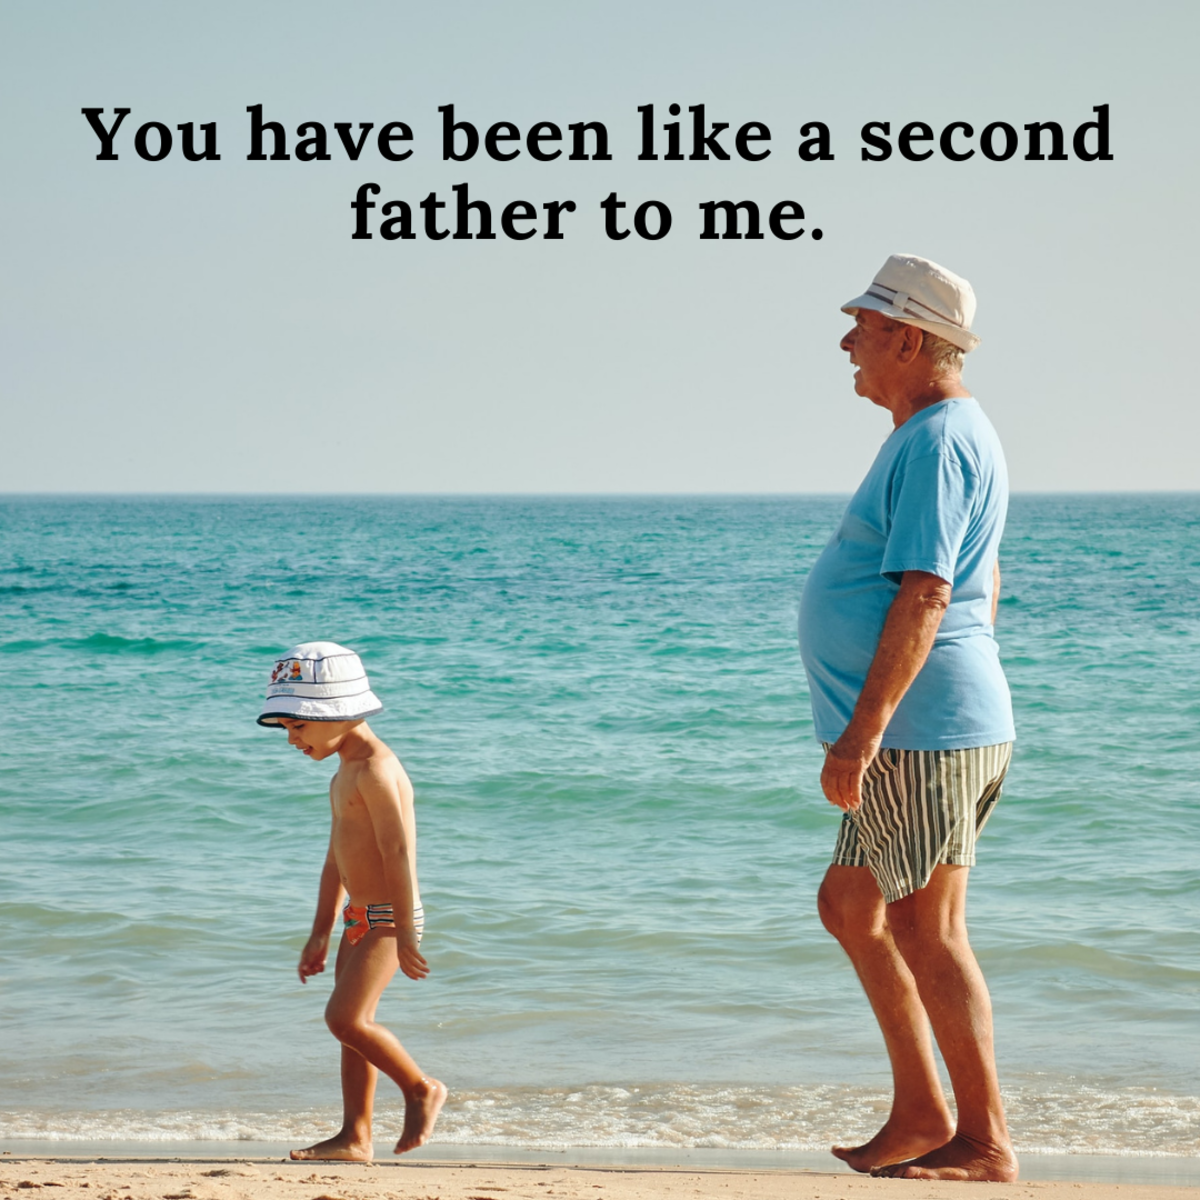 If your grandpa means a lot to you, wish him a happy Father's Day!